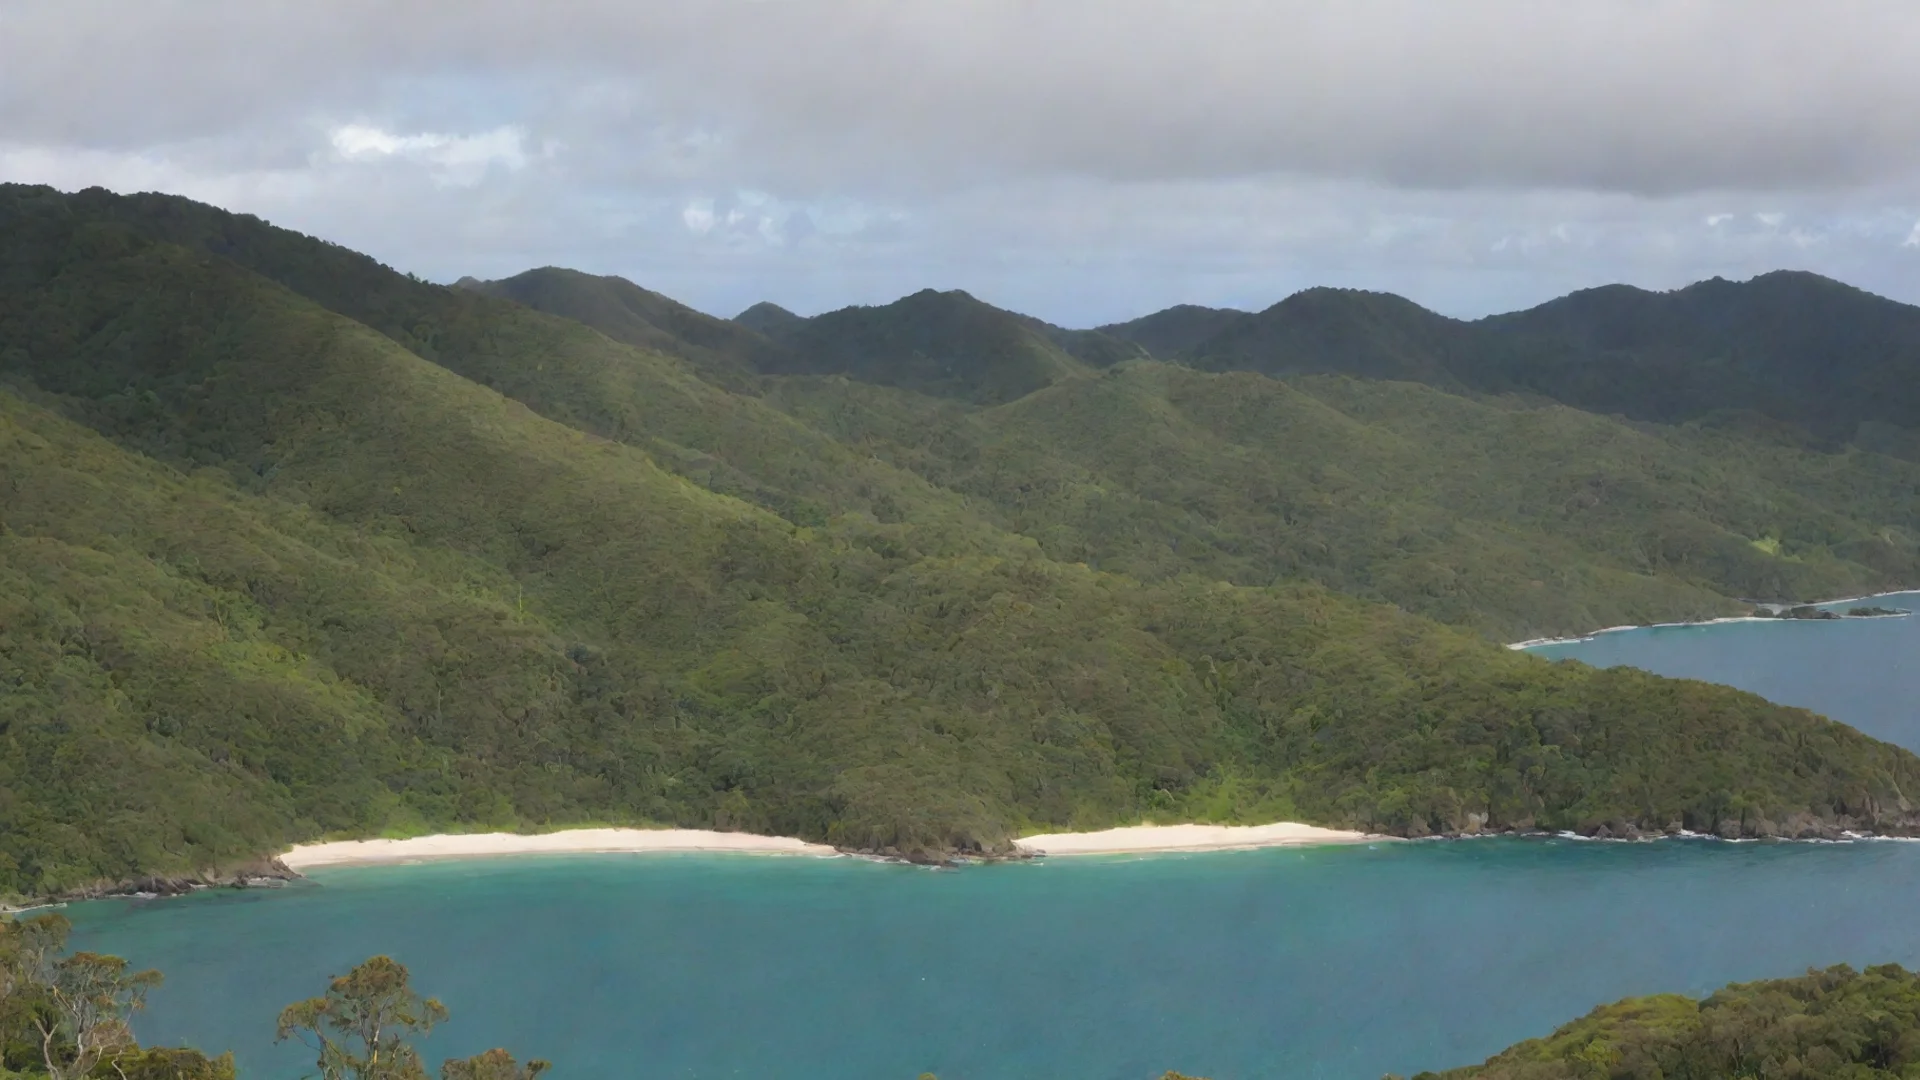 aiamazing forests rolling hills on shore pitureque bay of islands awesome portrait 2 wide